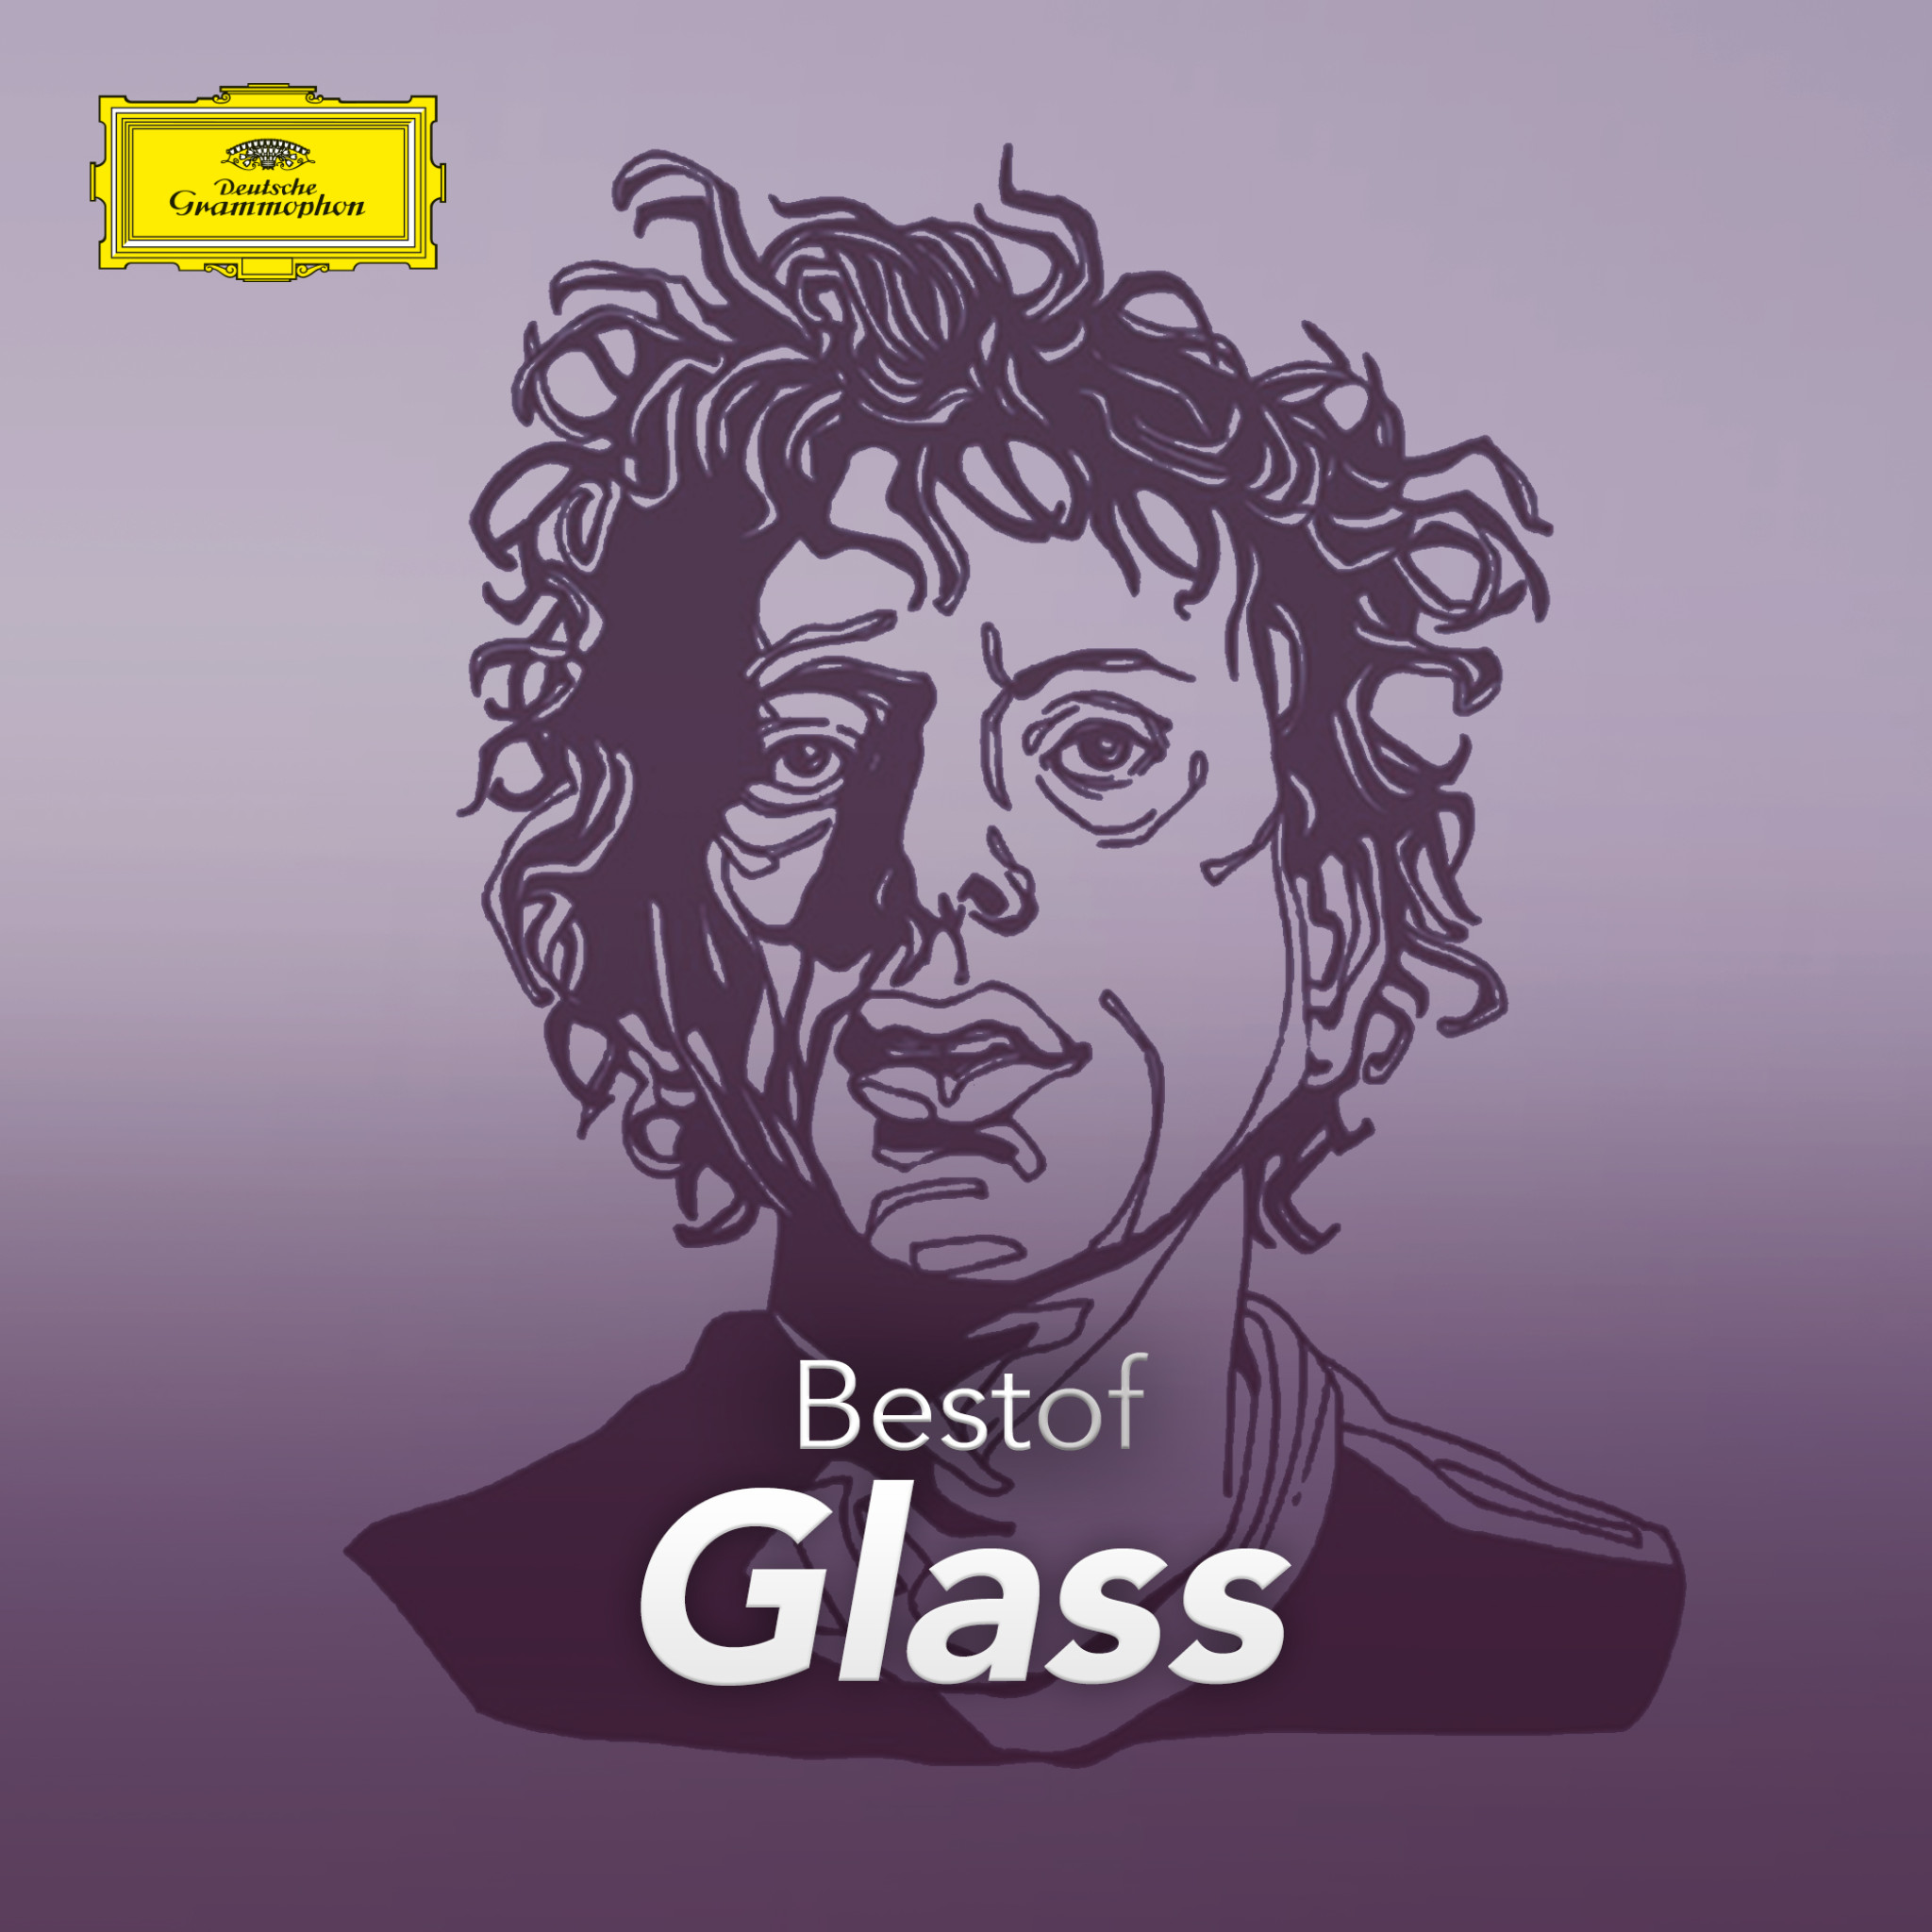 Glass - Best of